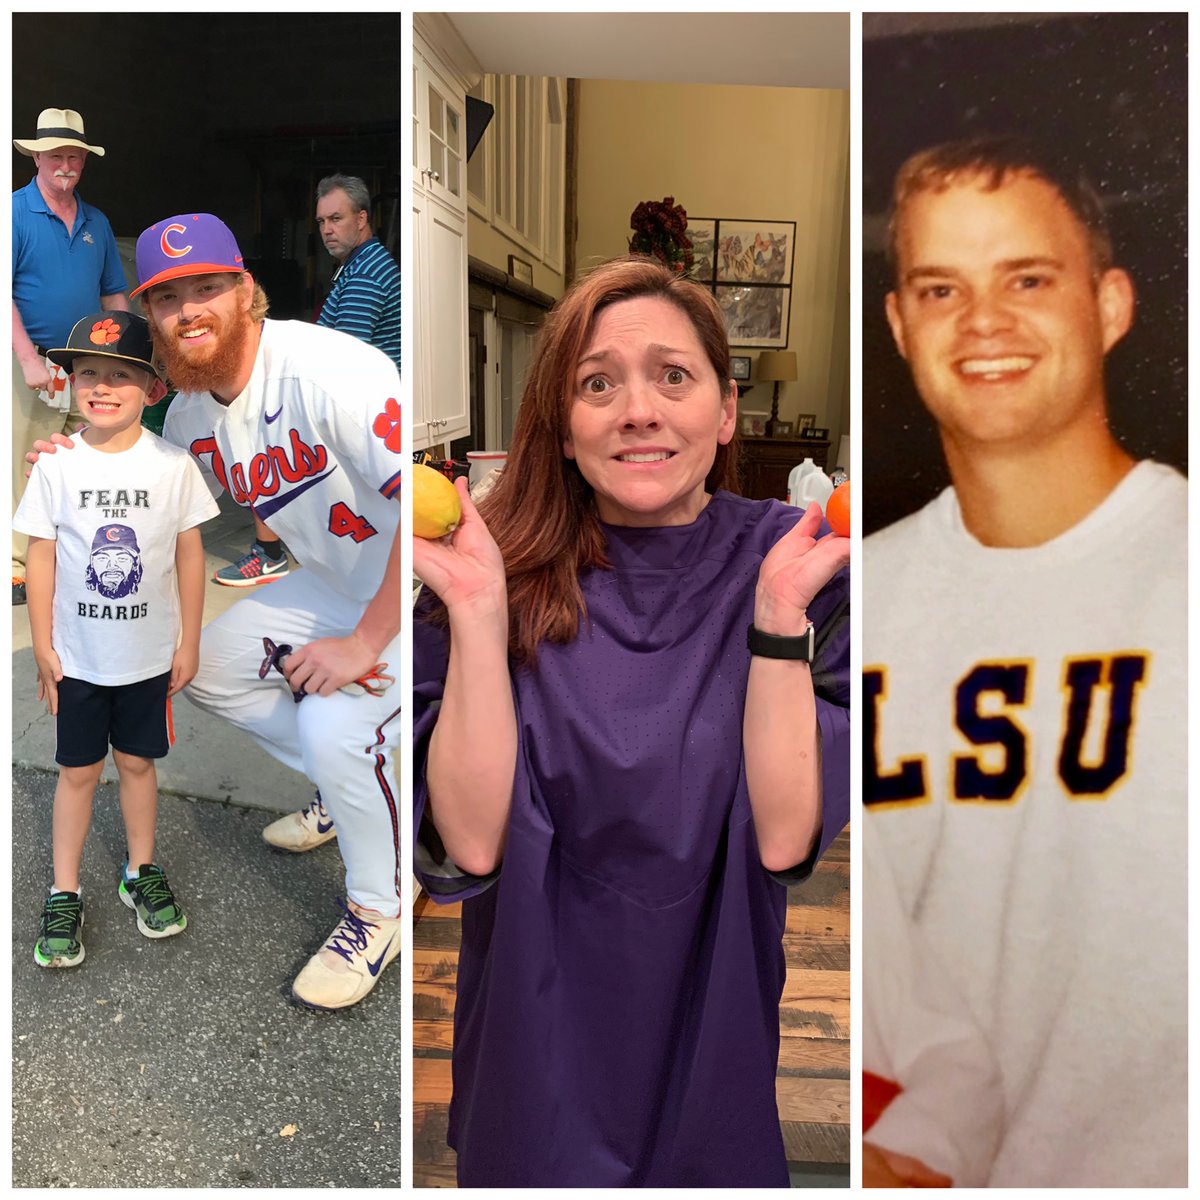 Paul Byrd on X: HUGE PROBLEM: Clemson All-American on the left, good  looking but perplexed woman in the middle & LSU All-American on the  right. So should the pretty lady be pulling